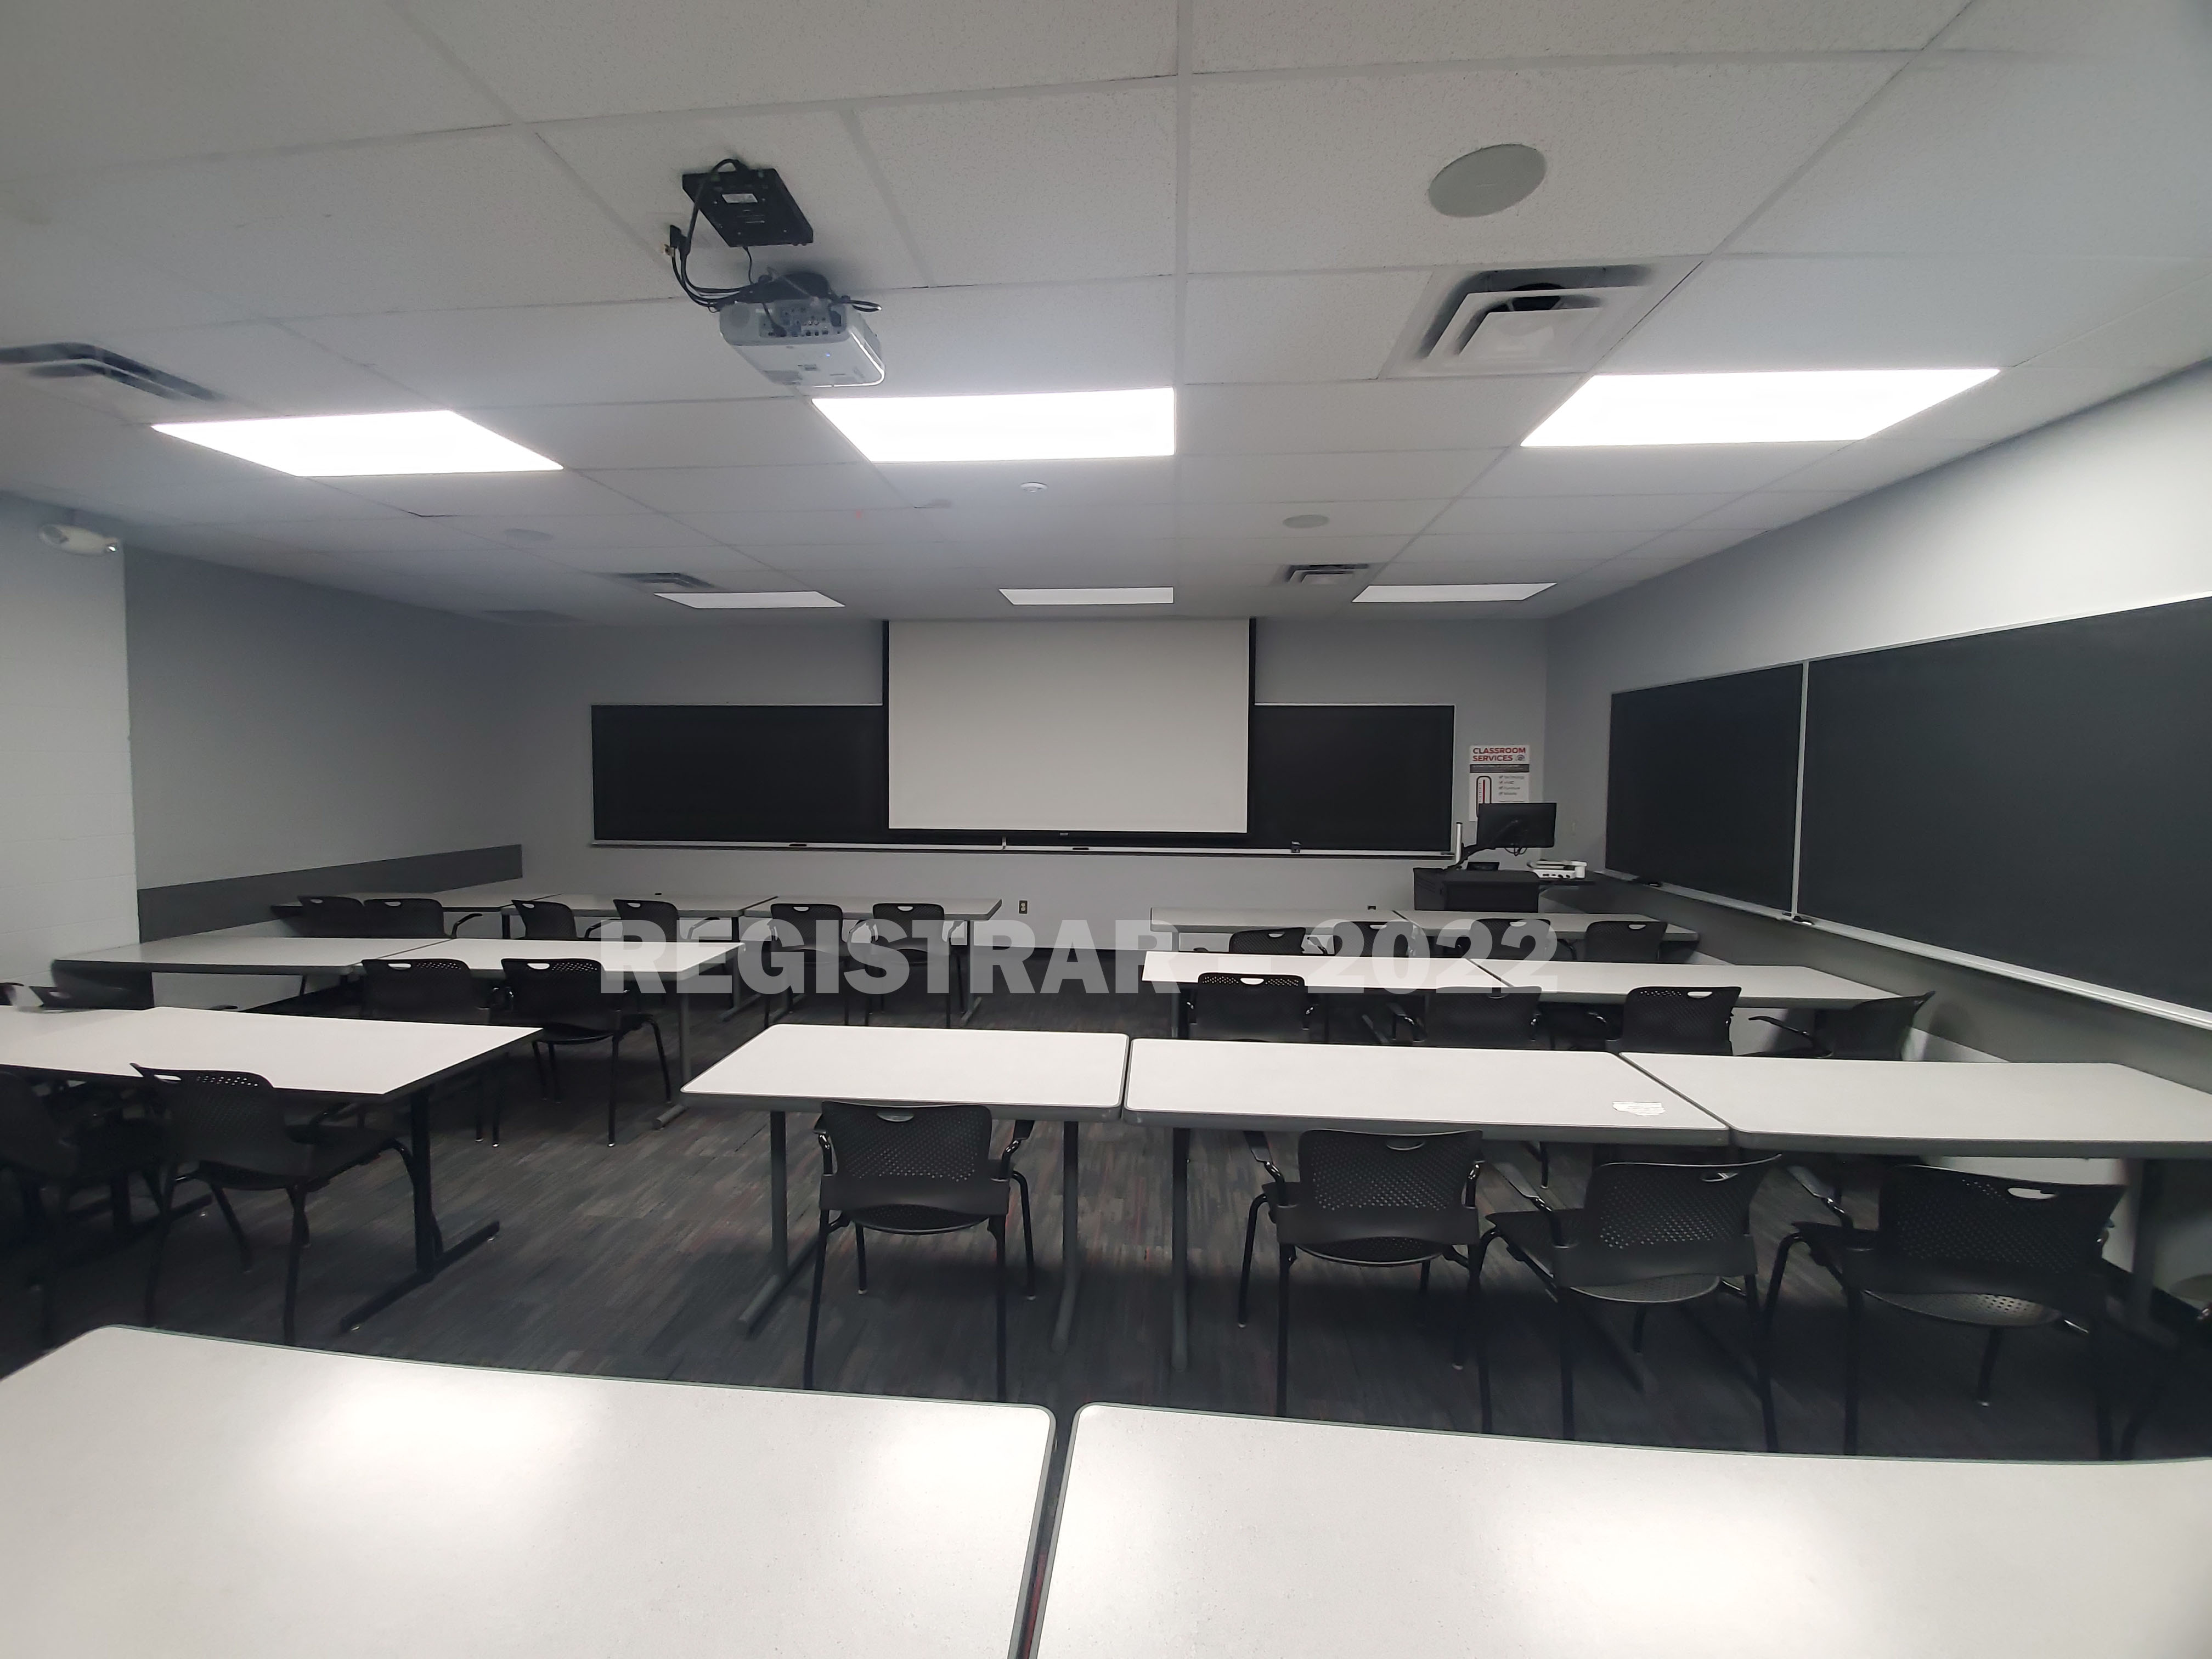 Baker Systems Engineering room 148 ultra wide angle view from the back of the room with projector screen down